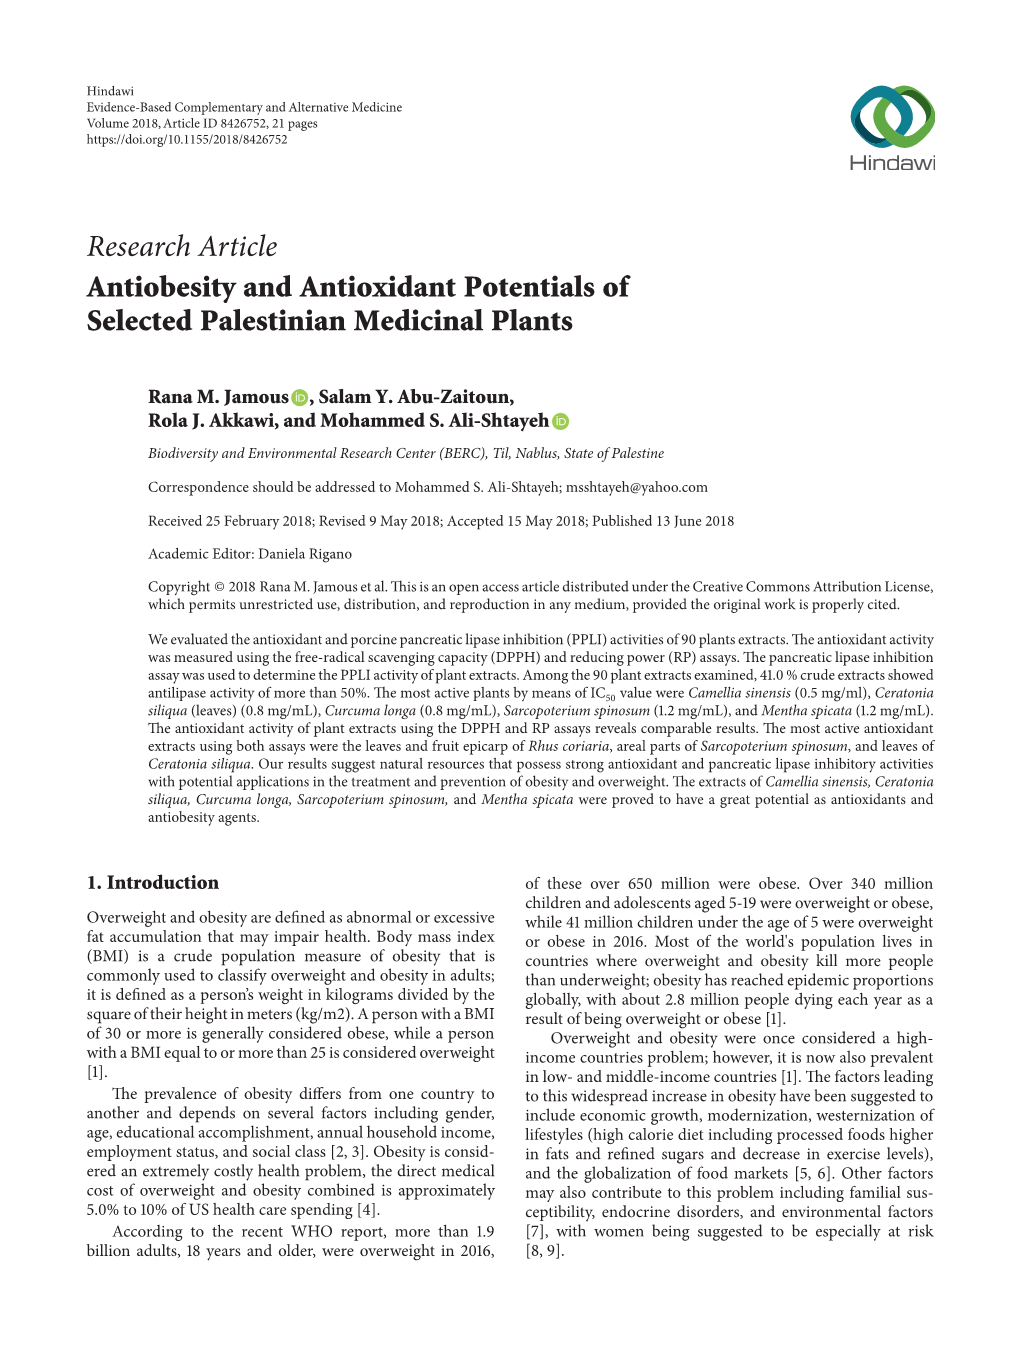 Research Article Antiobesity and Antioxidant Potentials of Selected Palestinian Medicinal Plants